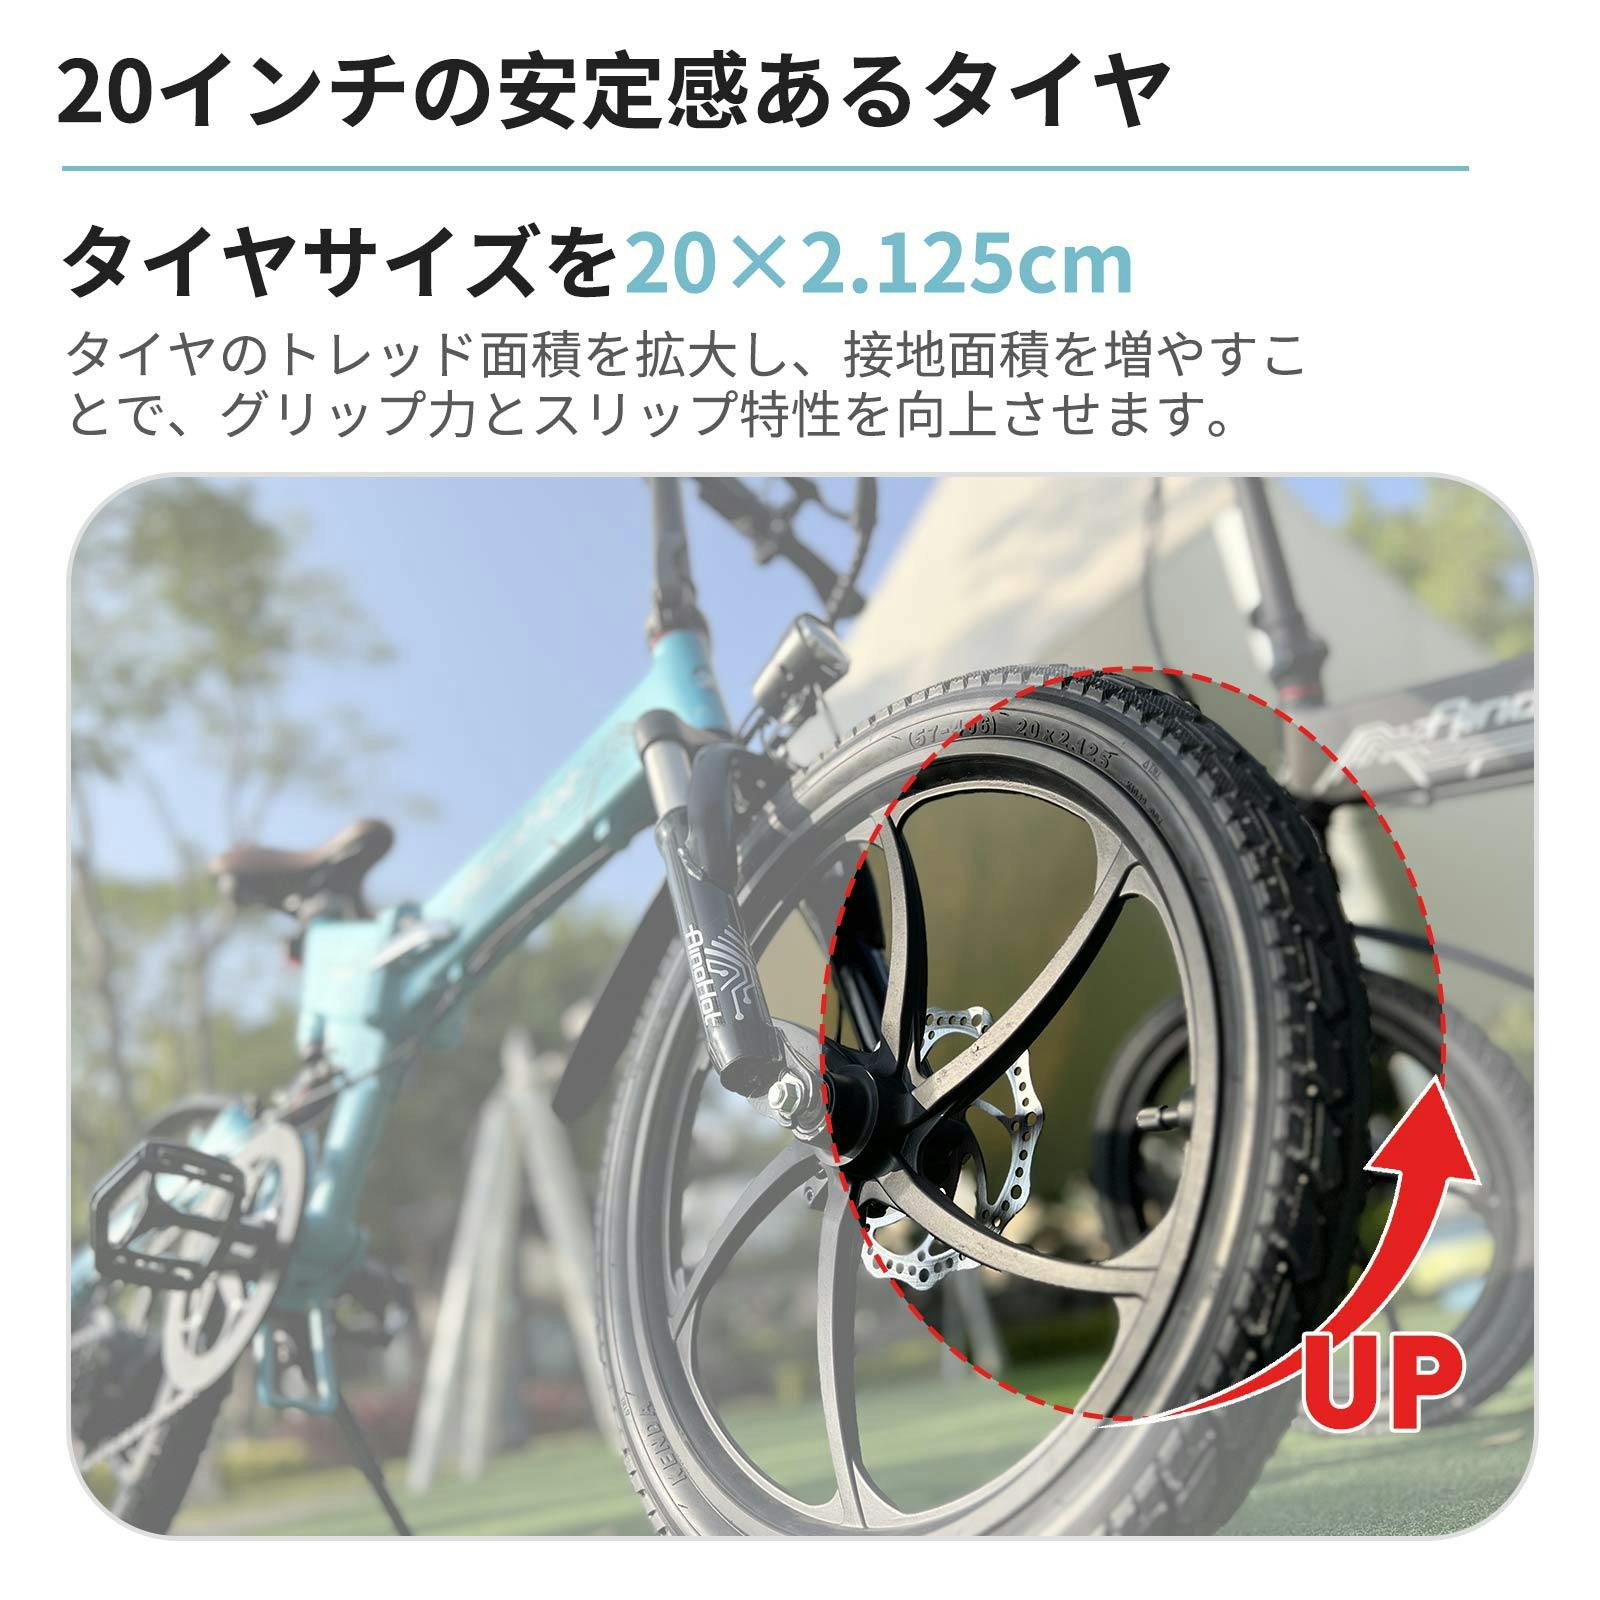 AINOHOT AS6 電動アシスト自転車 【形式認定済】 公道走行可 折り畳み 